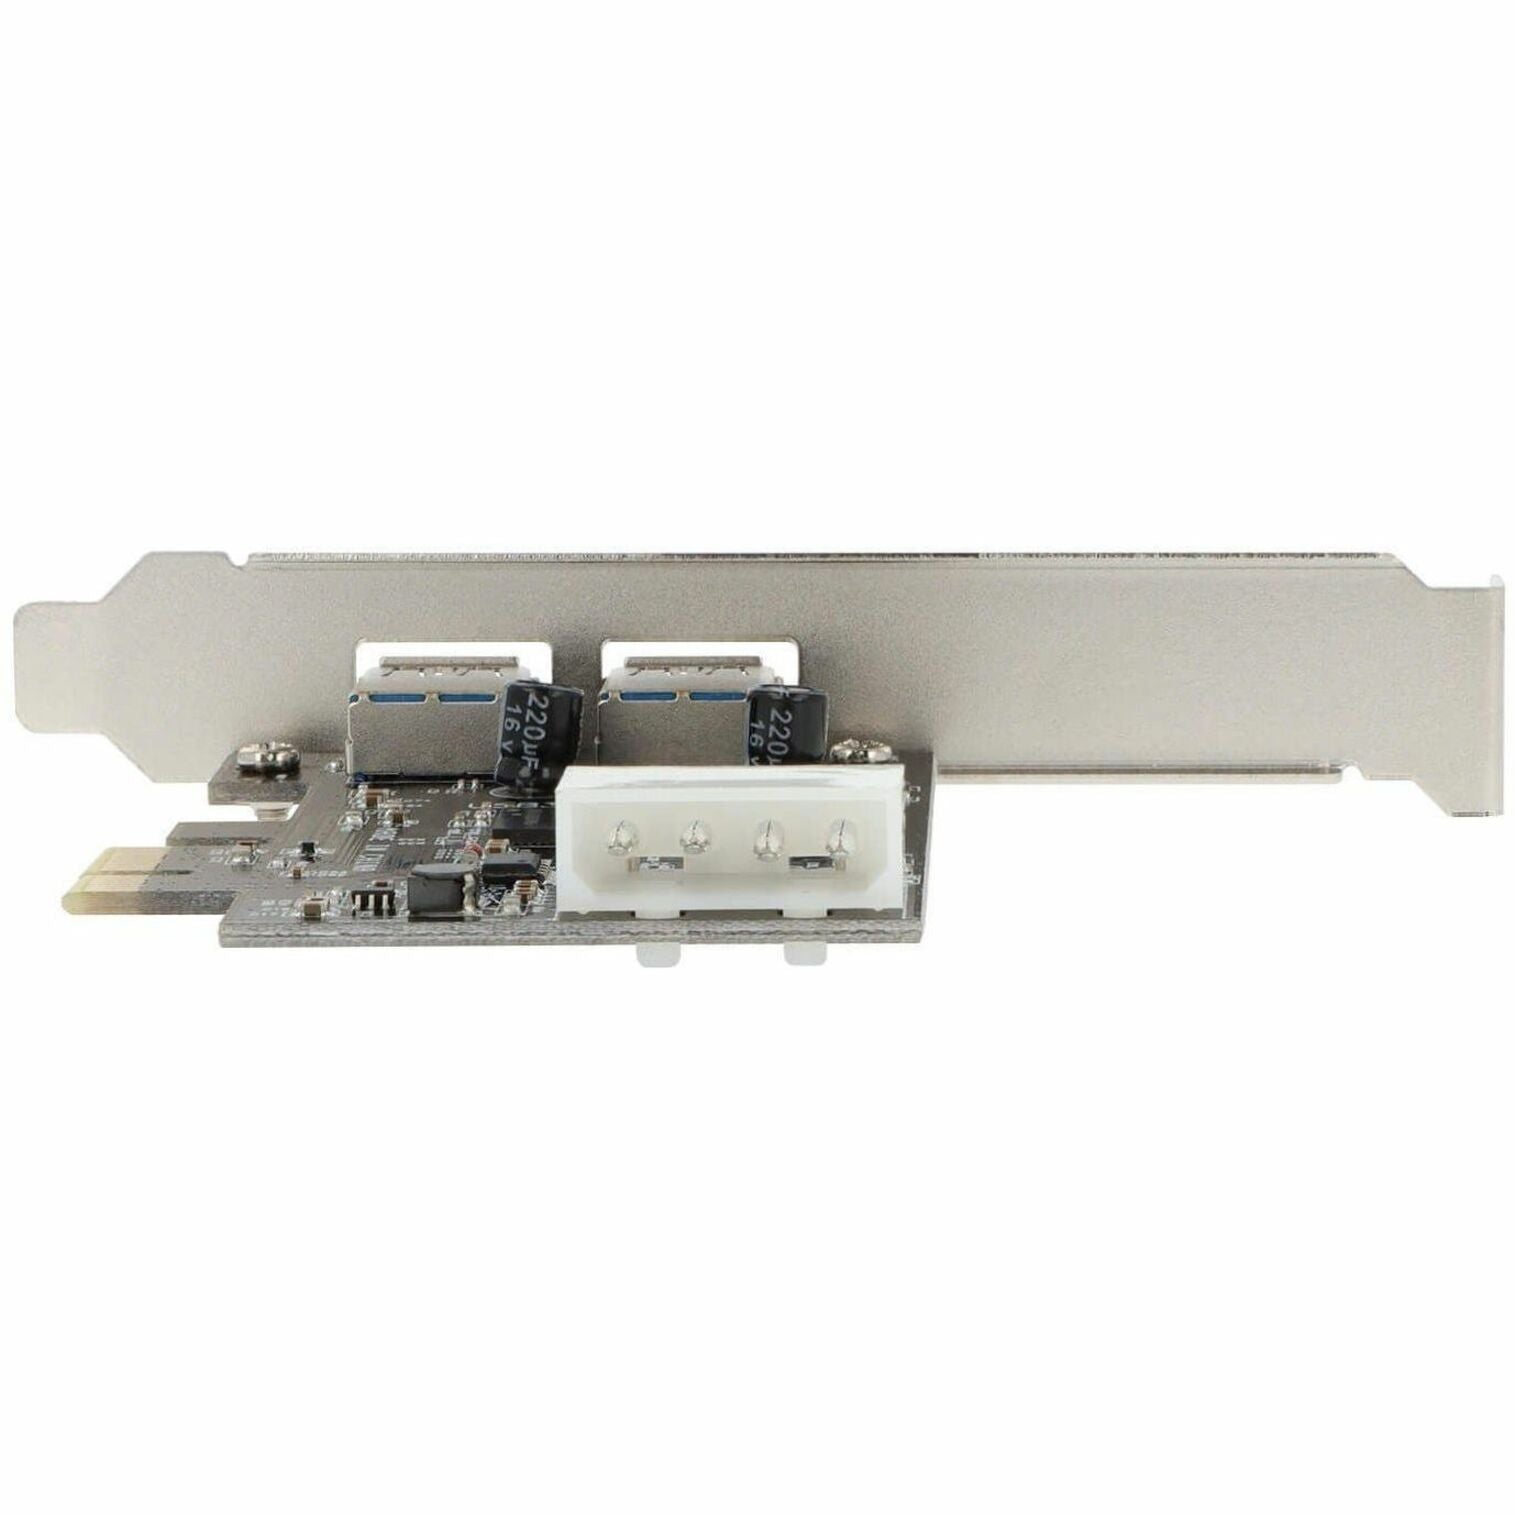 VisionTek 900598 USB 3.0 PCIe Expansion Card 2-port, Enhance Your PC with High-Speed USB Connectivity